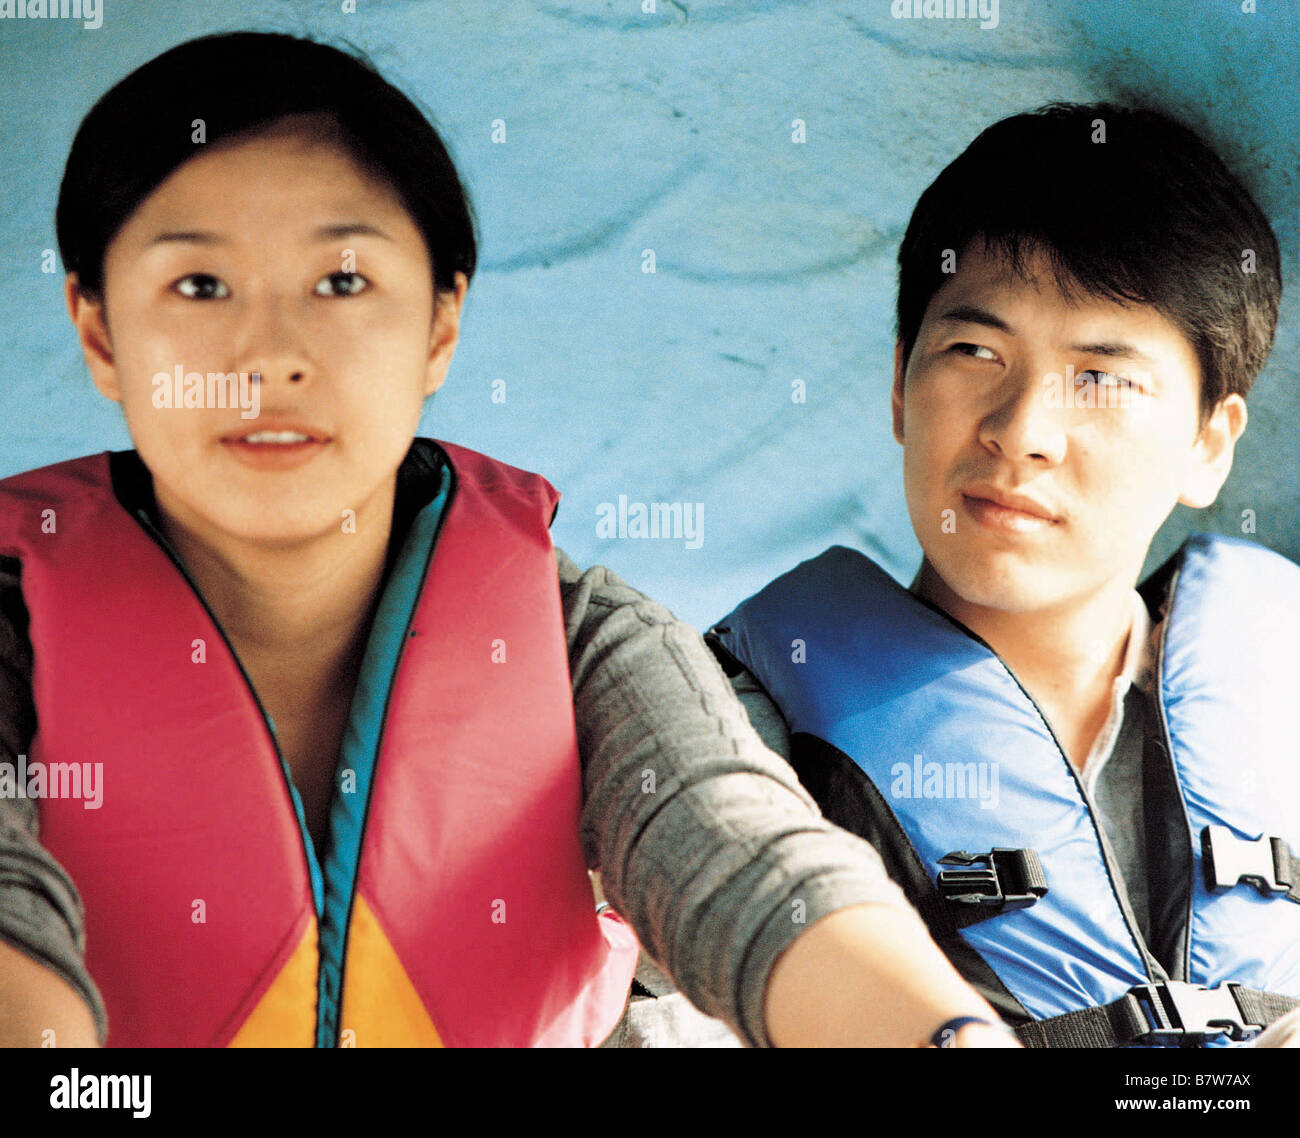 Turning gate Saenghwalui balgyeon / On the Occasion of Remembering the Turning  Gate Year: 2002 - South Korea Director: Sang-soo Hong Stock Photo - Alamy